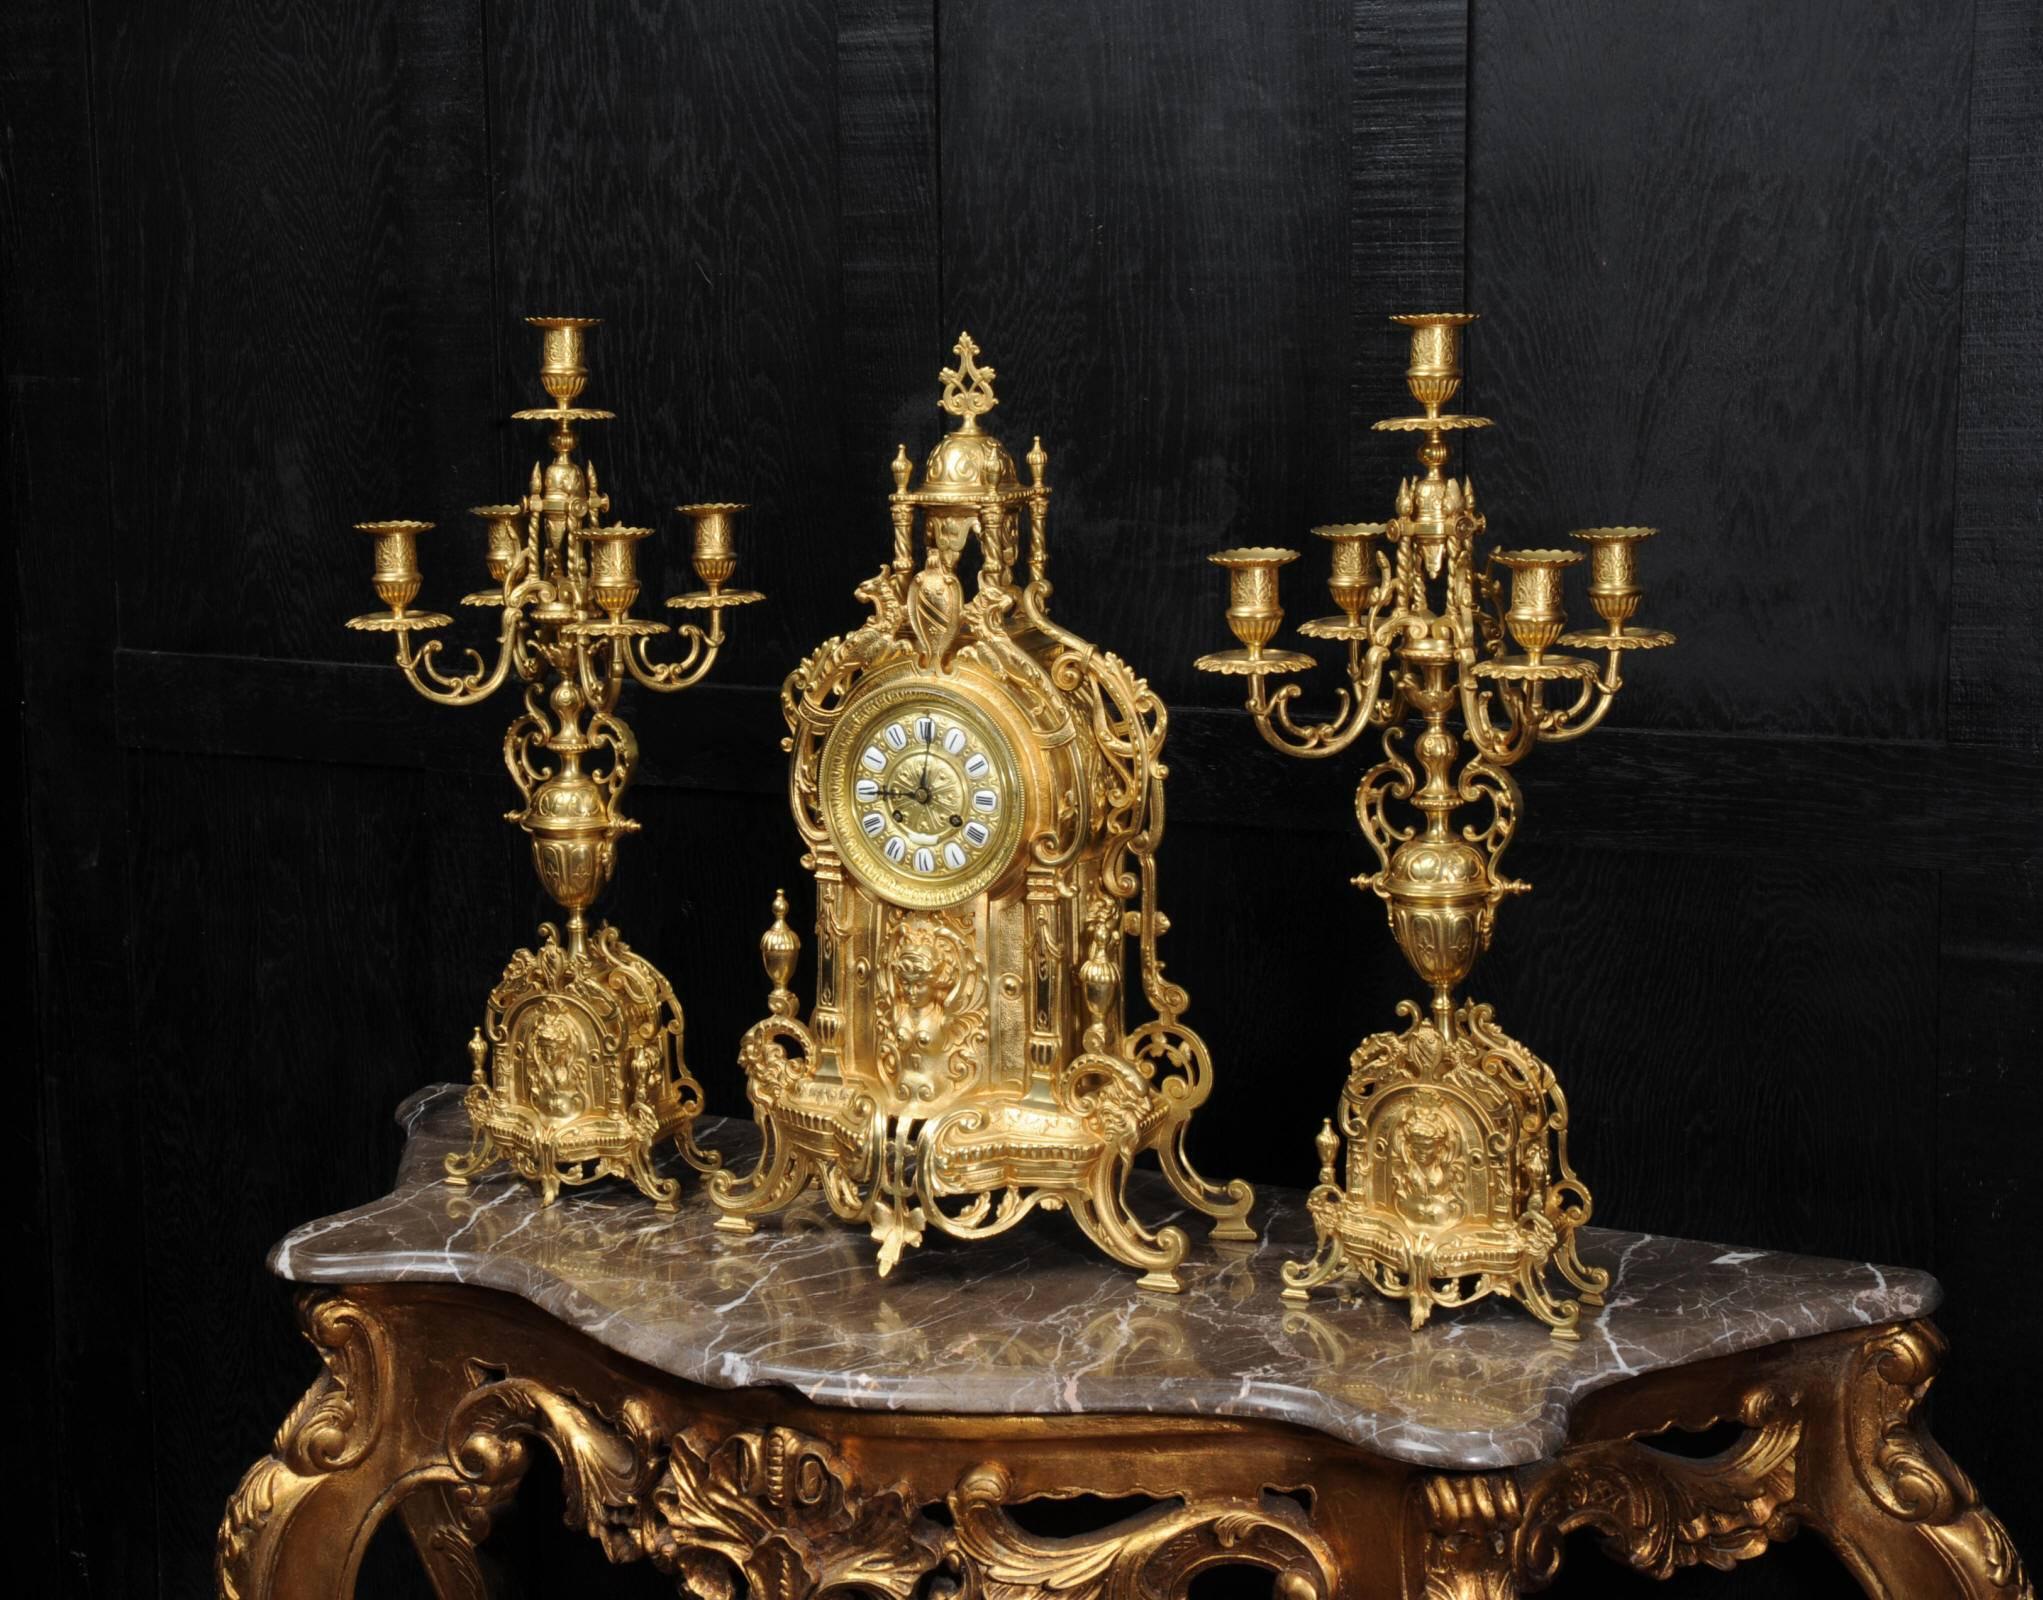 A superb original antique French gilt bronze clock set, circa 1880. It is Baroque in style and features the Goddess Nike in a panel below the dial. Above the dial is a shield with mythical beasts and an elaborate urn standing on four pillars. A